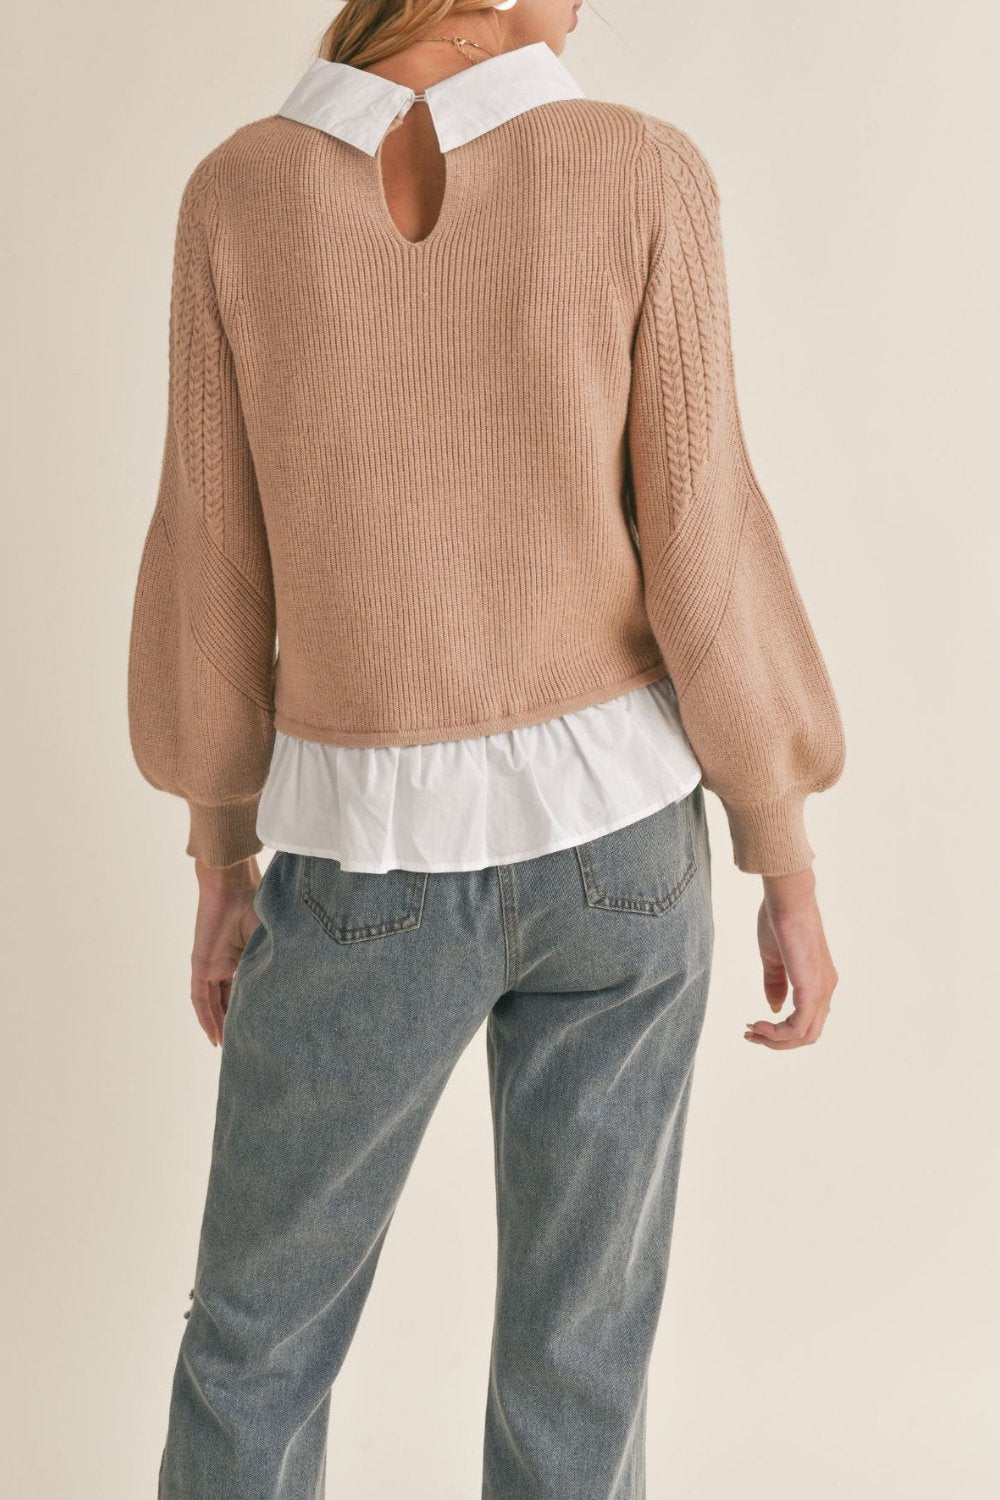 Women&#39;s Wednesday Layered Twofer Sweater Top | Tan - Women&#39;s Shirts &amp; Tops - Blooming Daily